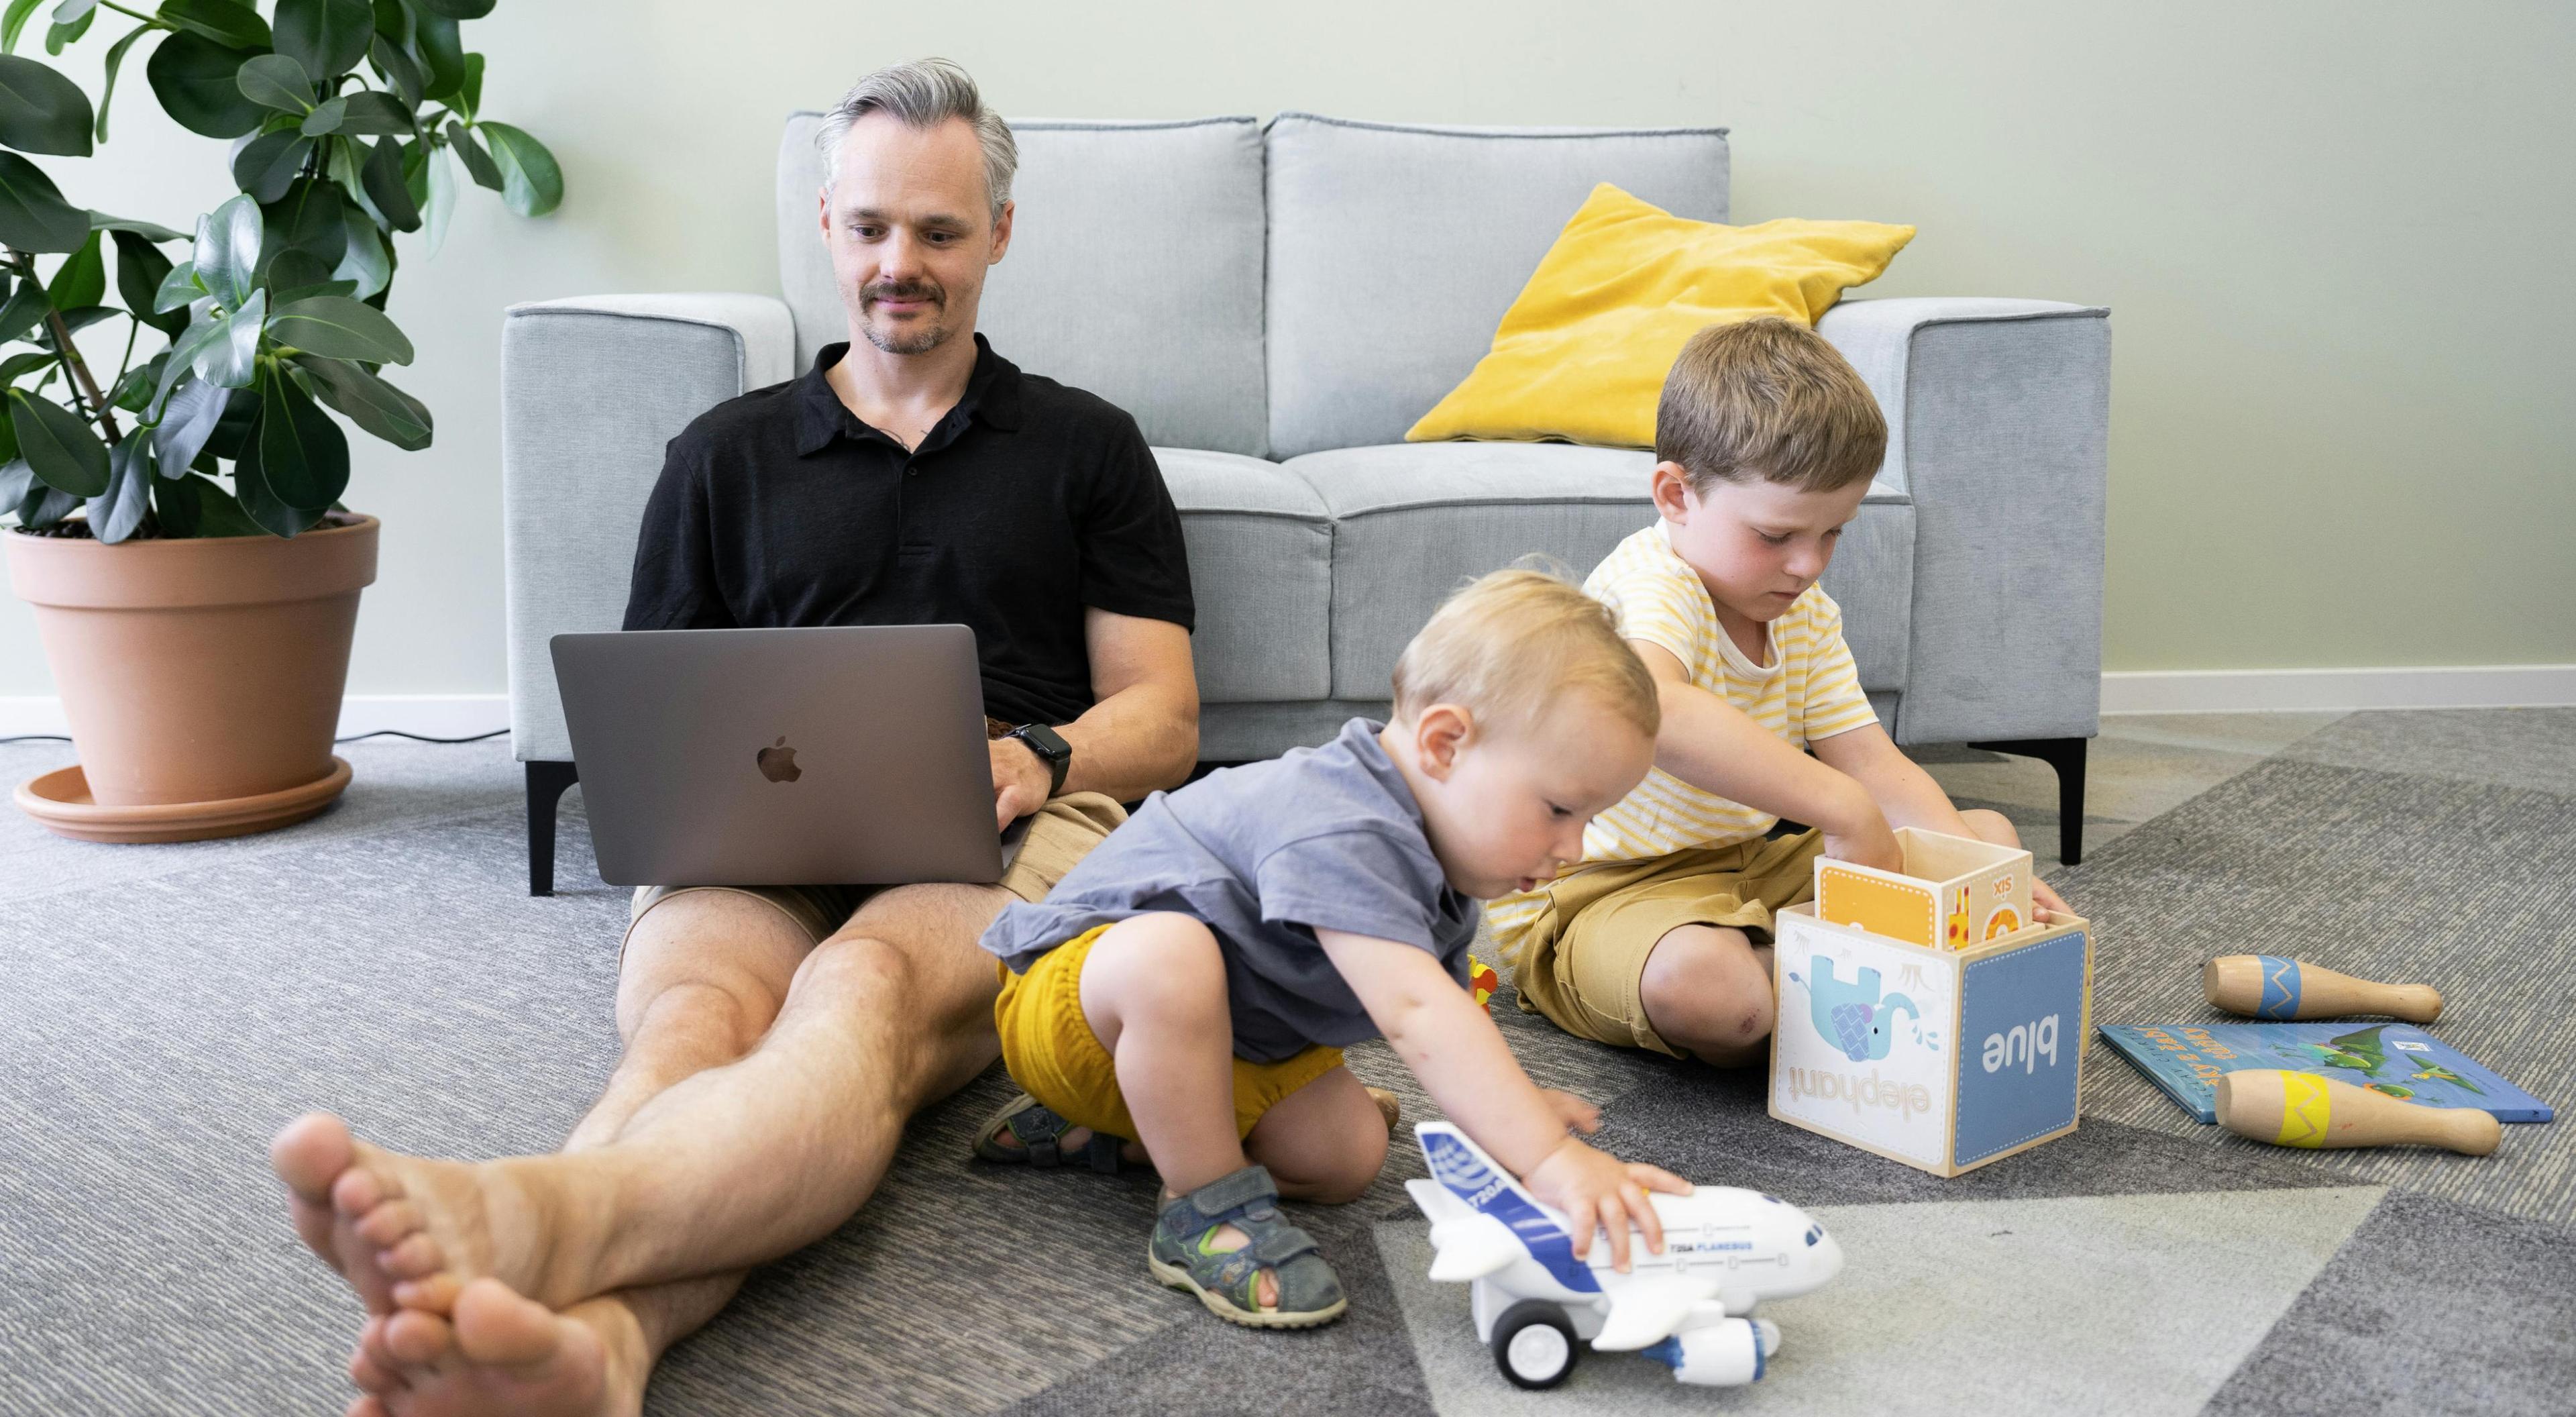 solution architect with a laptop on his lap sitting on the floor next to his children